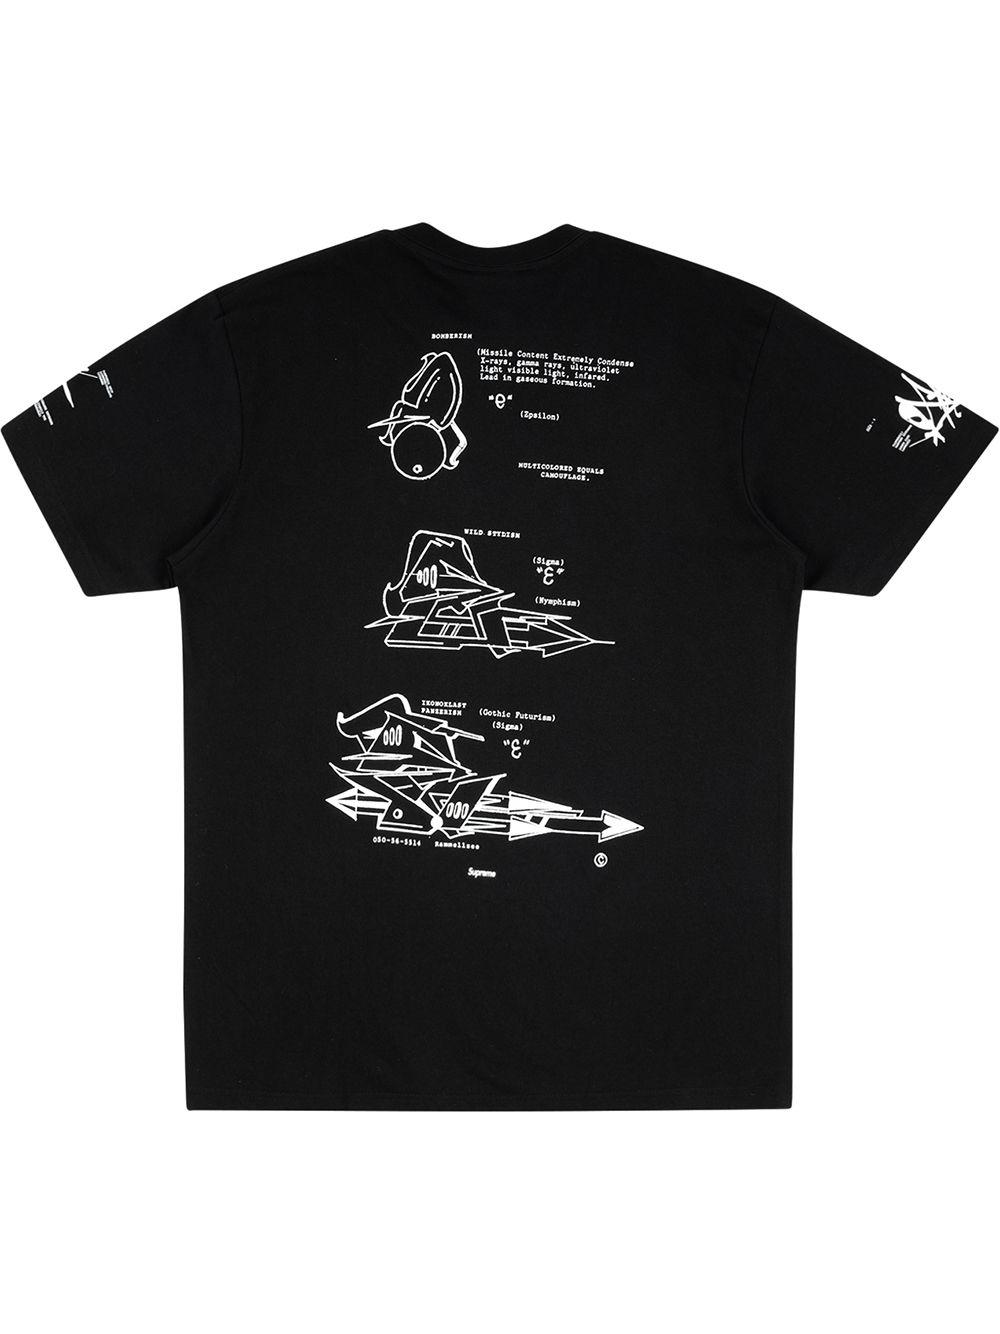 Supreme Cotton Rammellzee Tag T-shirt in Black for Men - Lyst